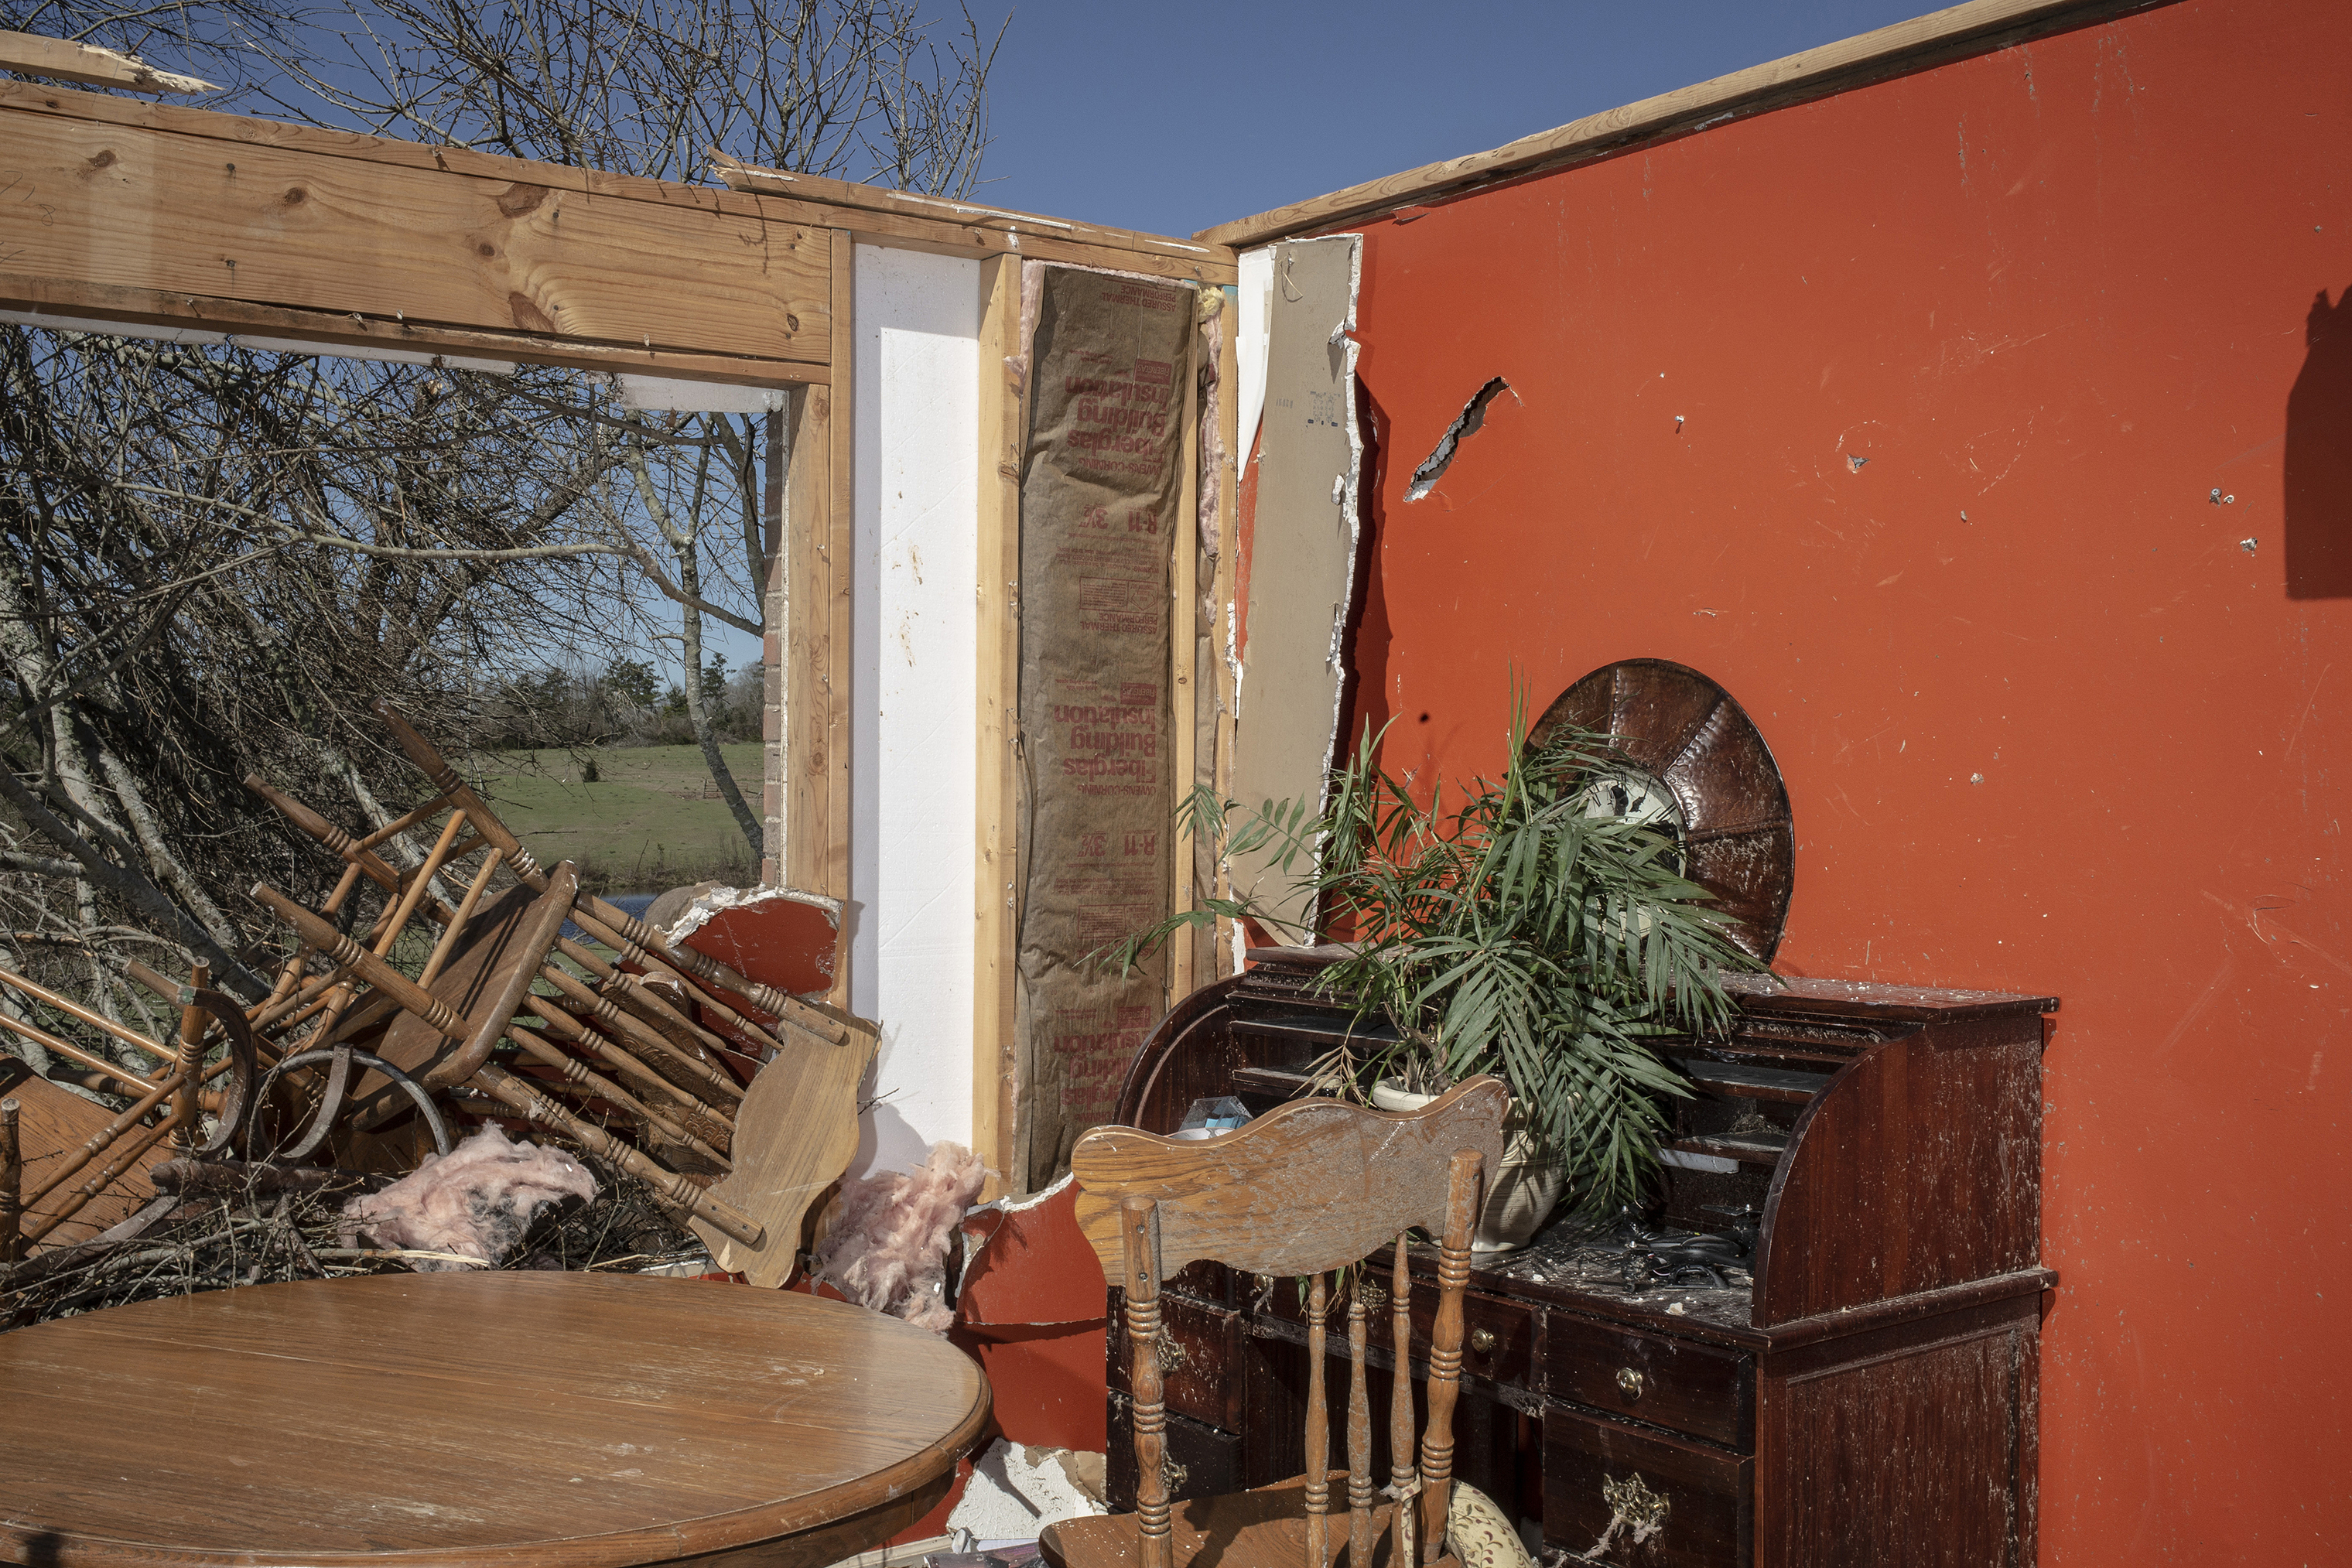 The Mattocks' dining room after a tornado passed over, killing several people and destroying homes in Beauregard, Alabama on March 4, 2019. (Bryan Anselm—Redux for TIME)